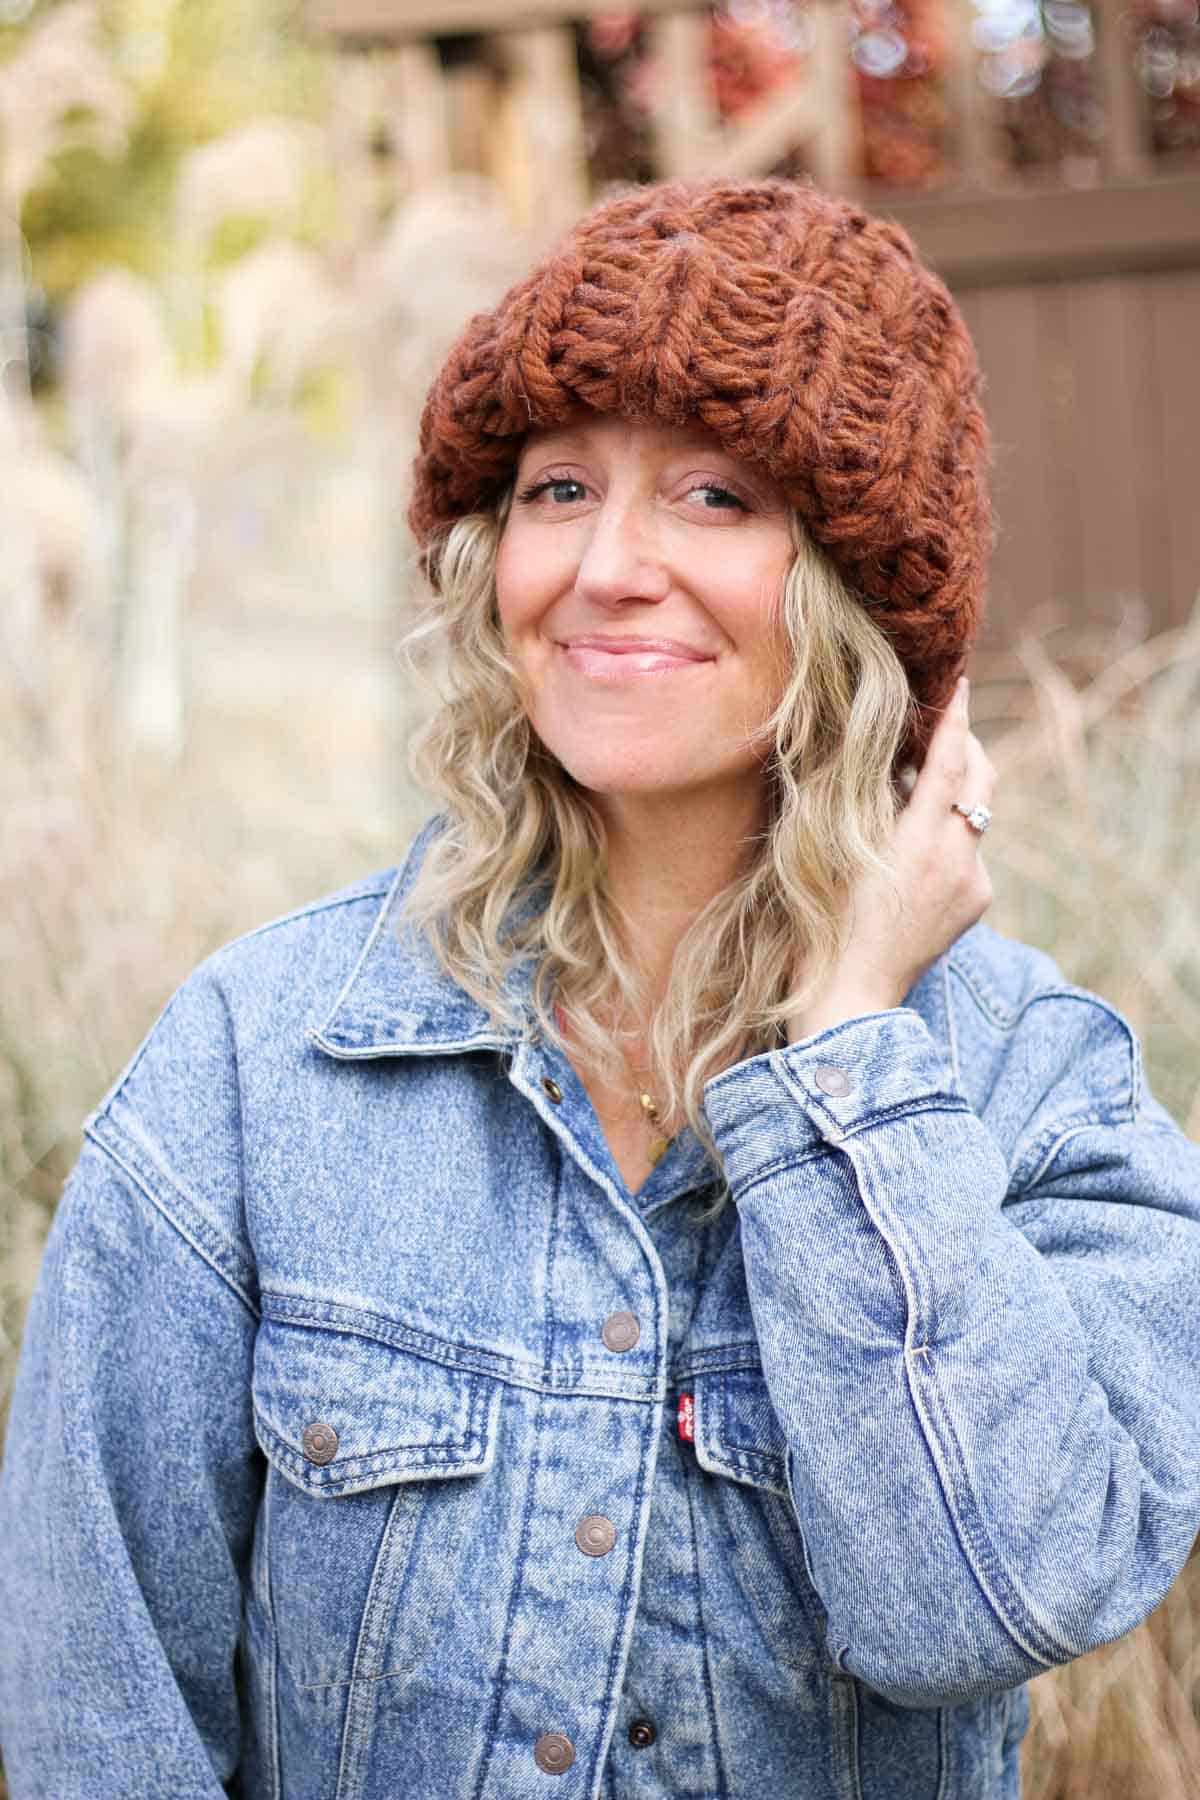 Super chunky knit hat modeled by a woman outside.